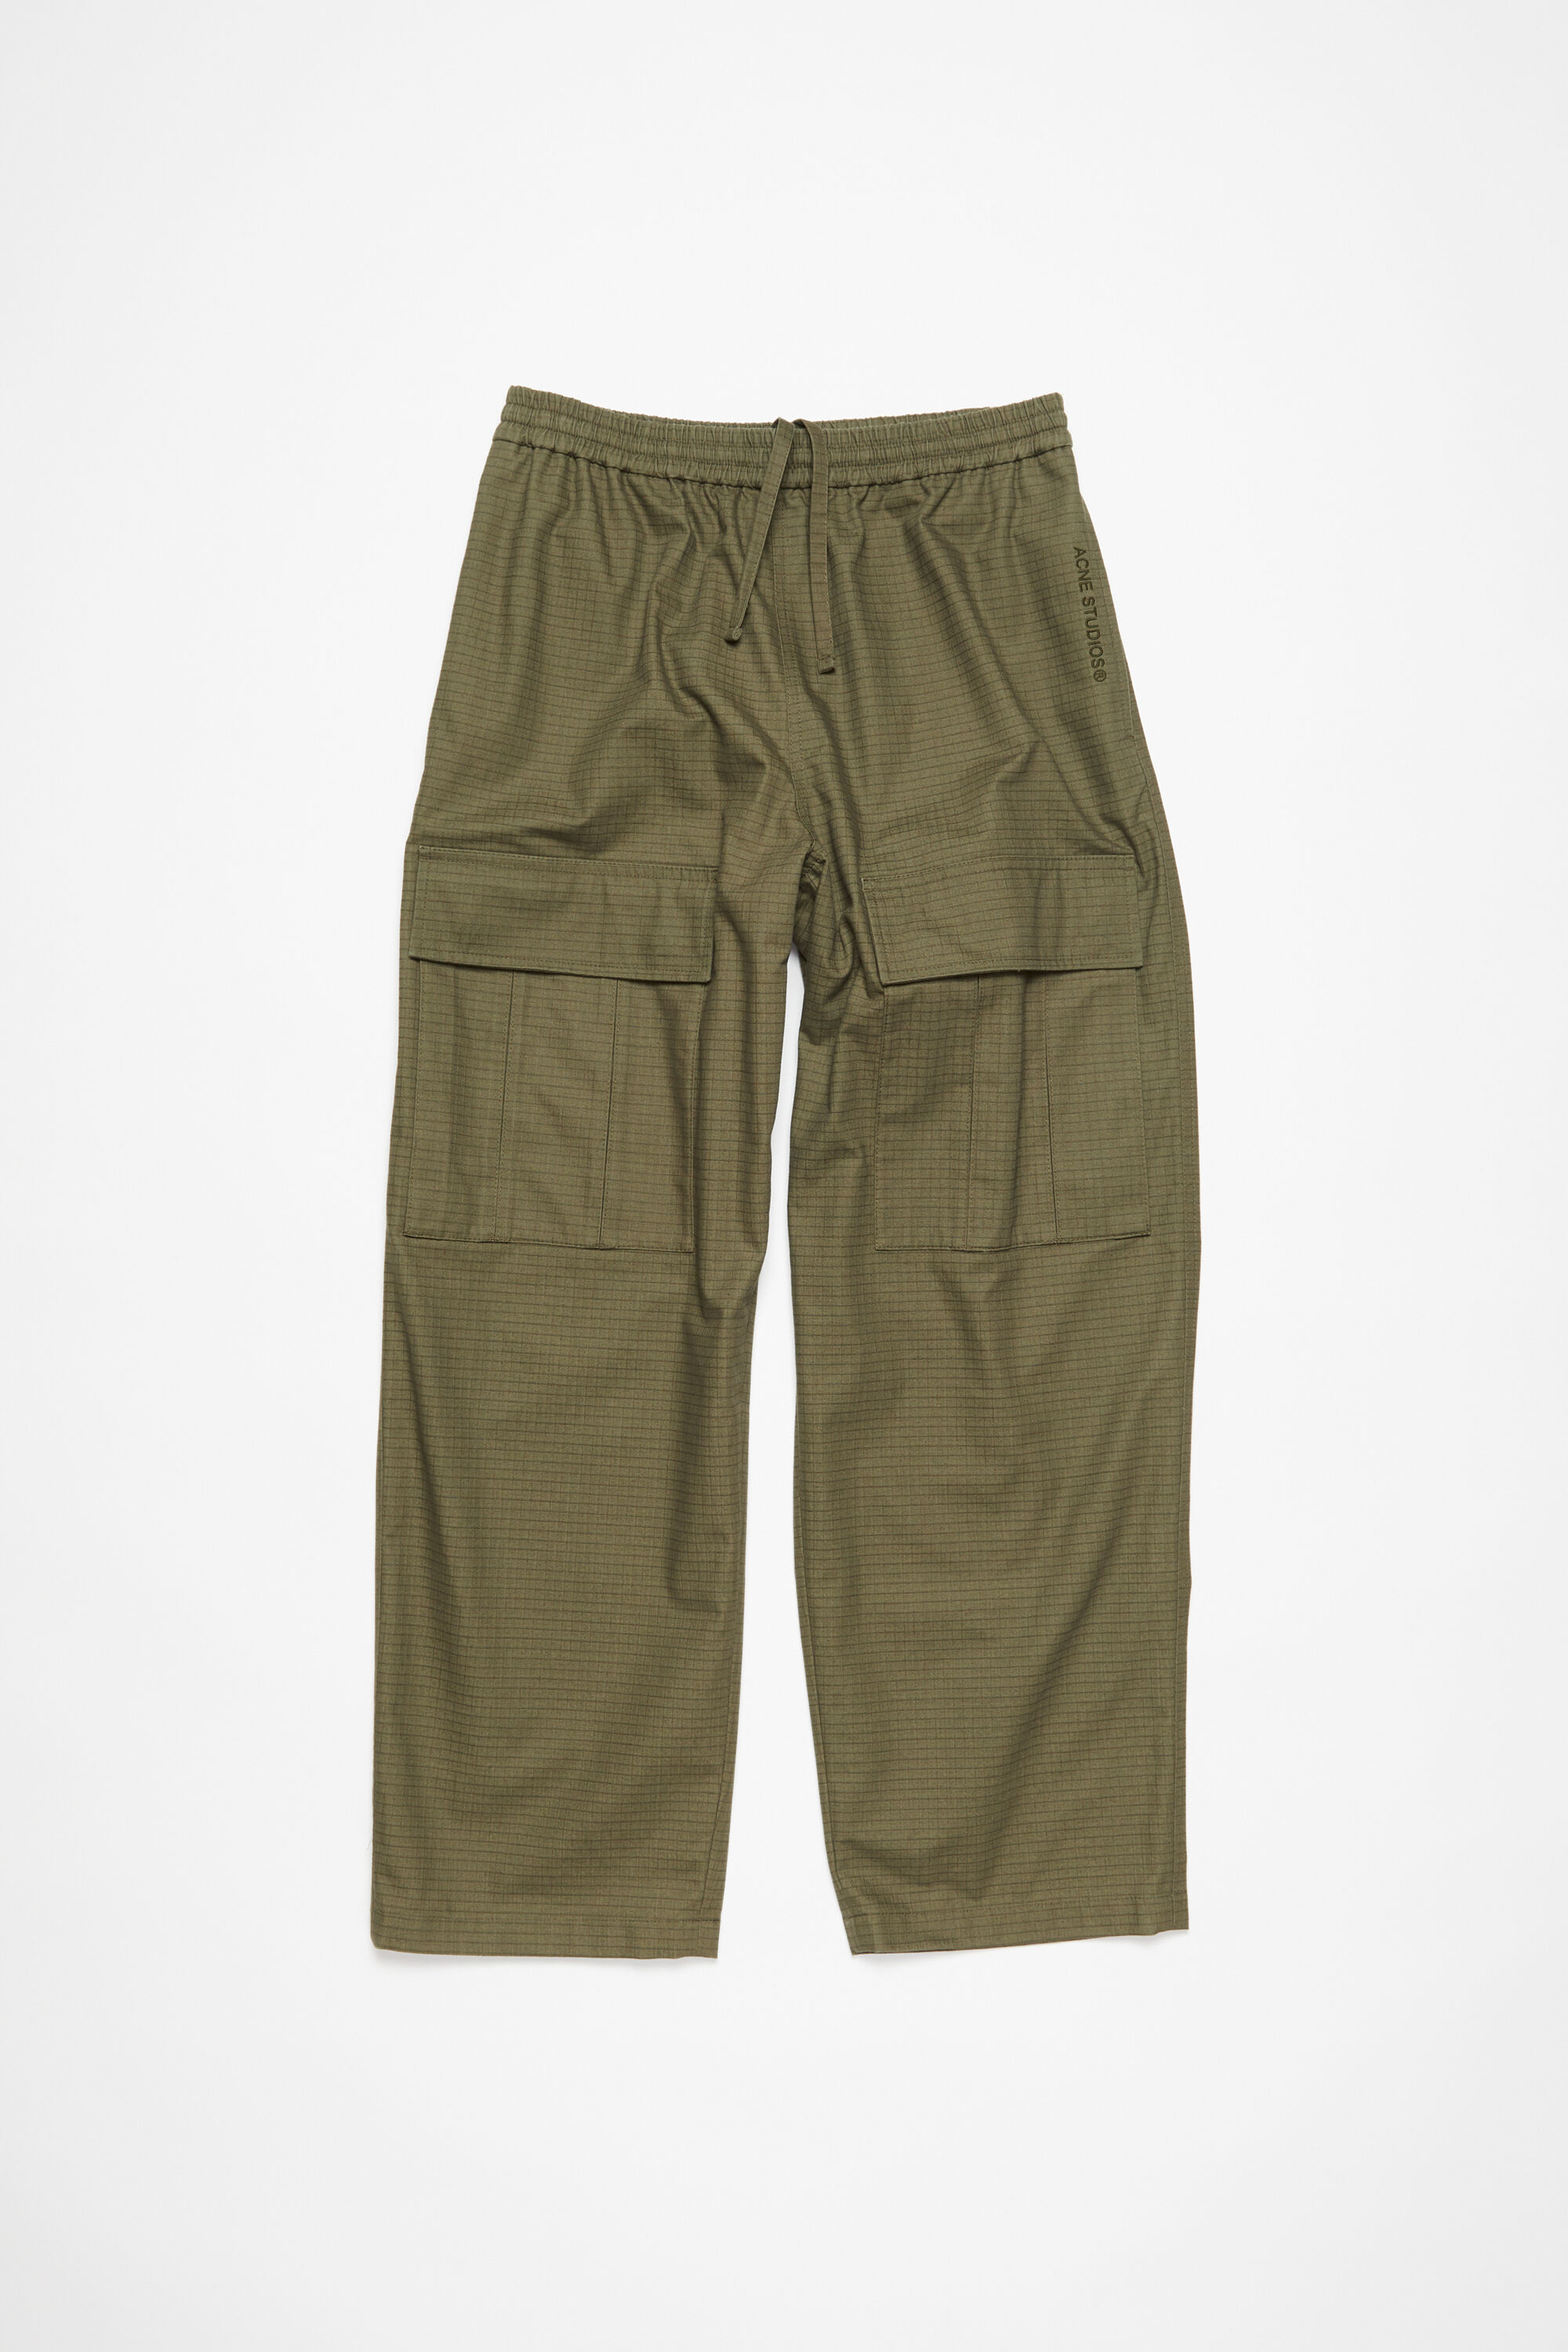 Olive Green | Lilivere Organic Cotton Carpenter Trousers | WoolOvers US